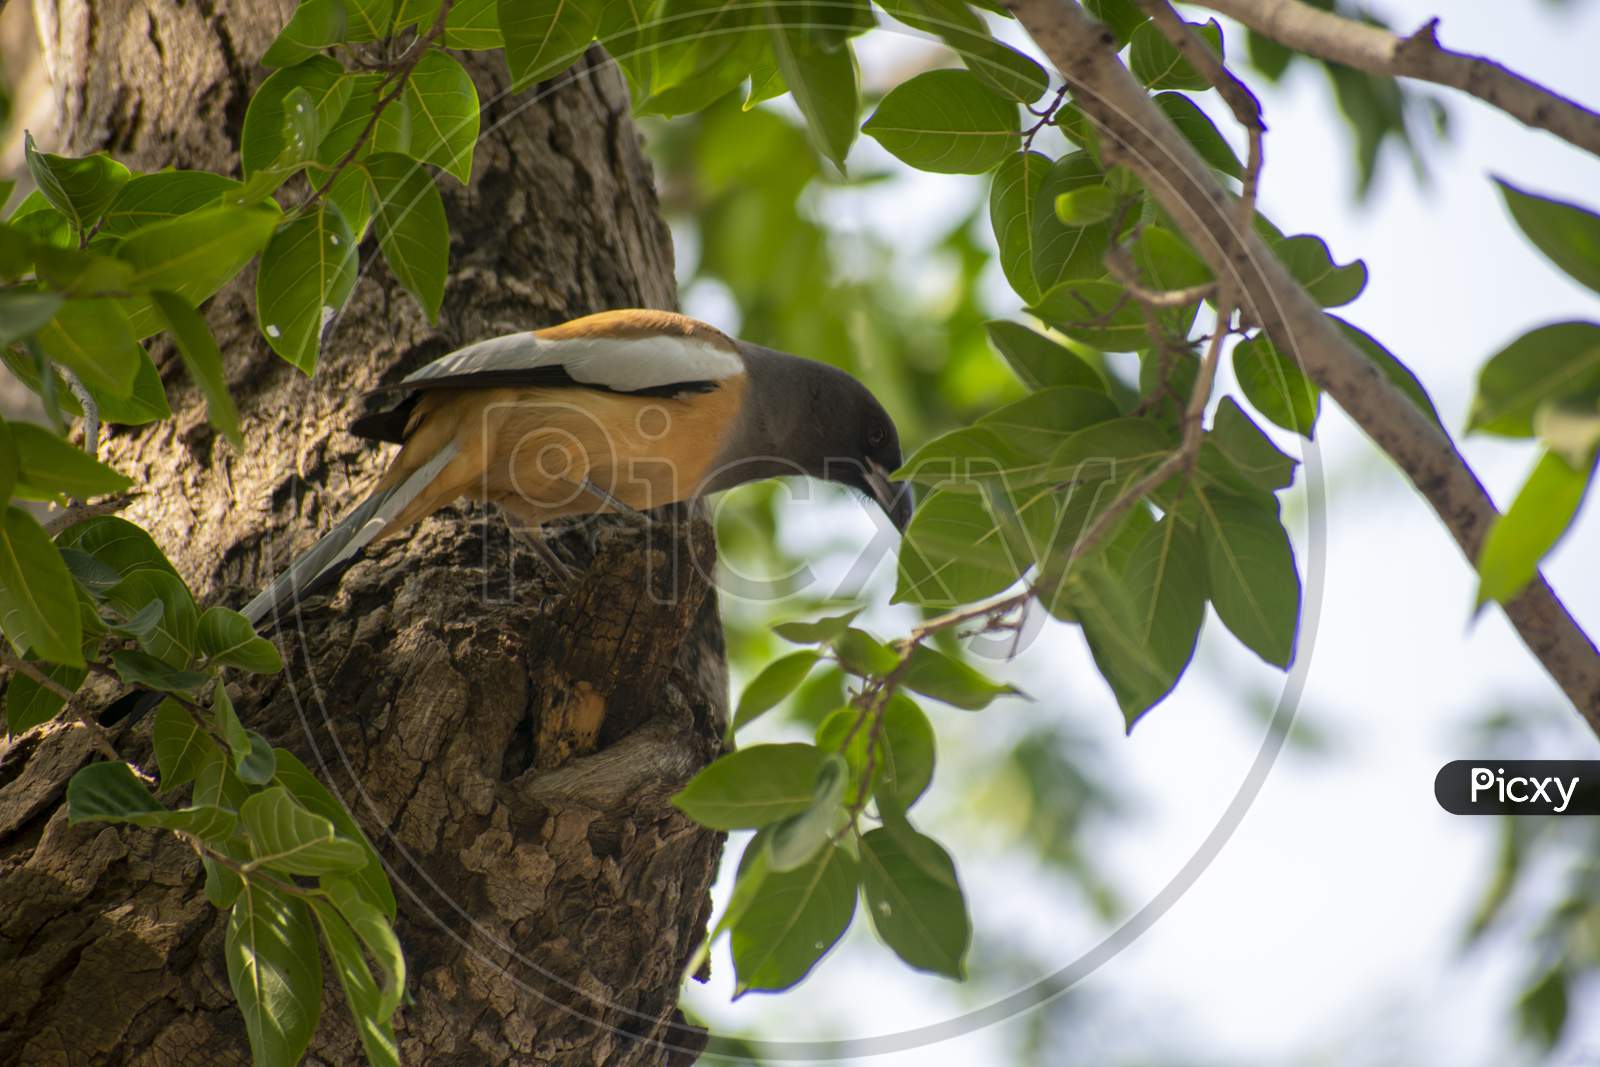 The Rufous Treepie Is A Treepie, Native To The Indian Subcontinent